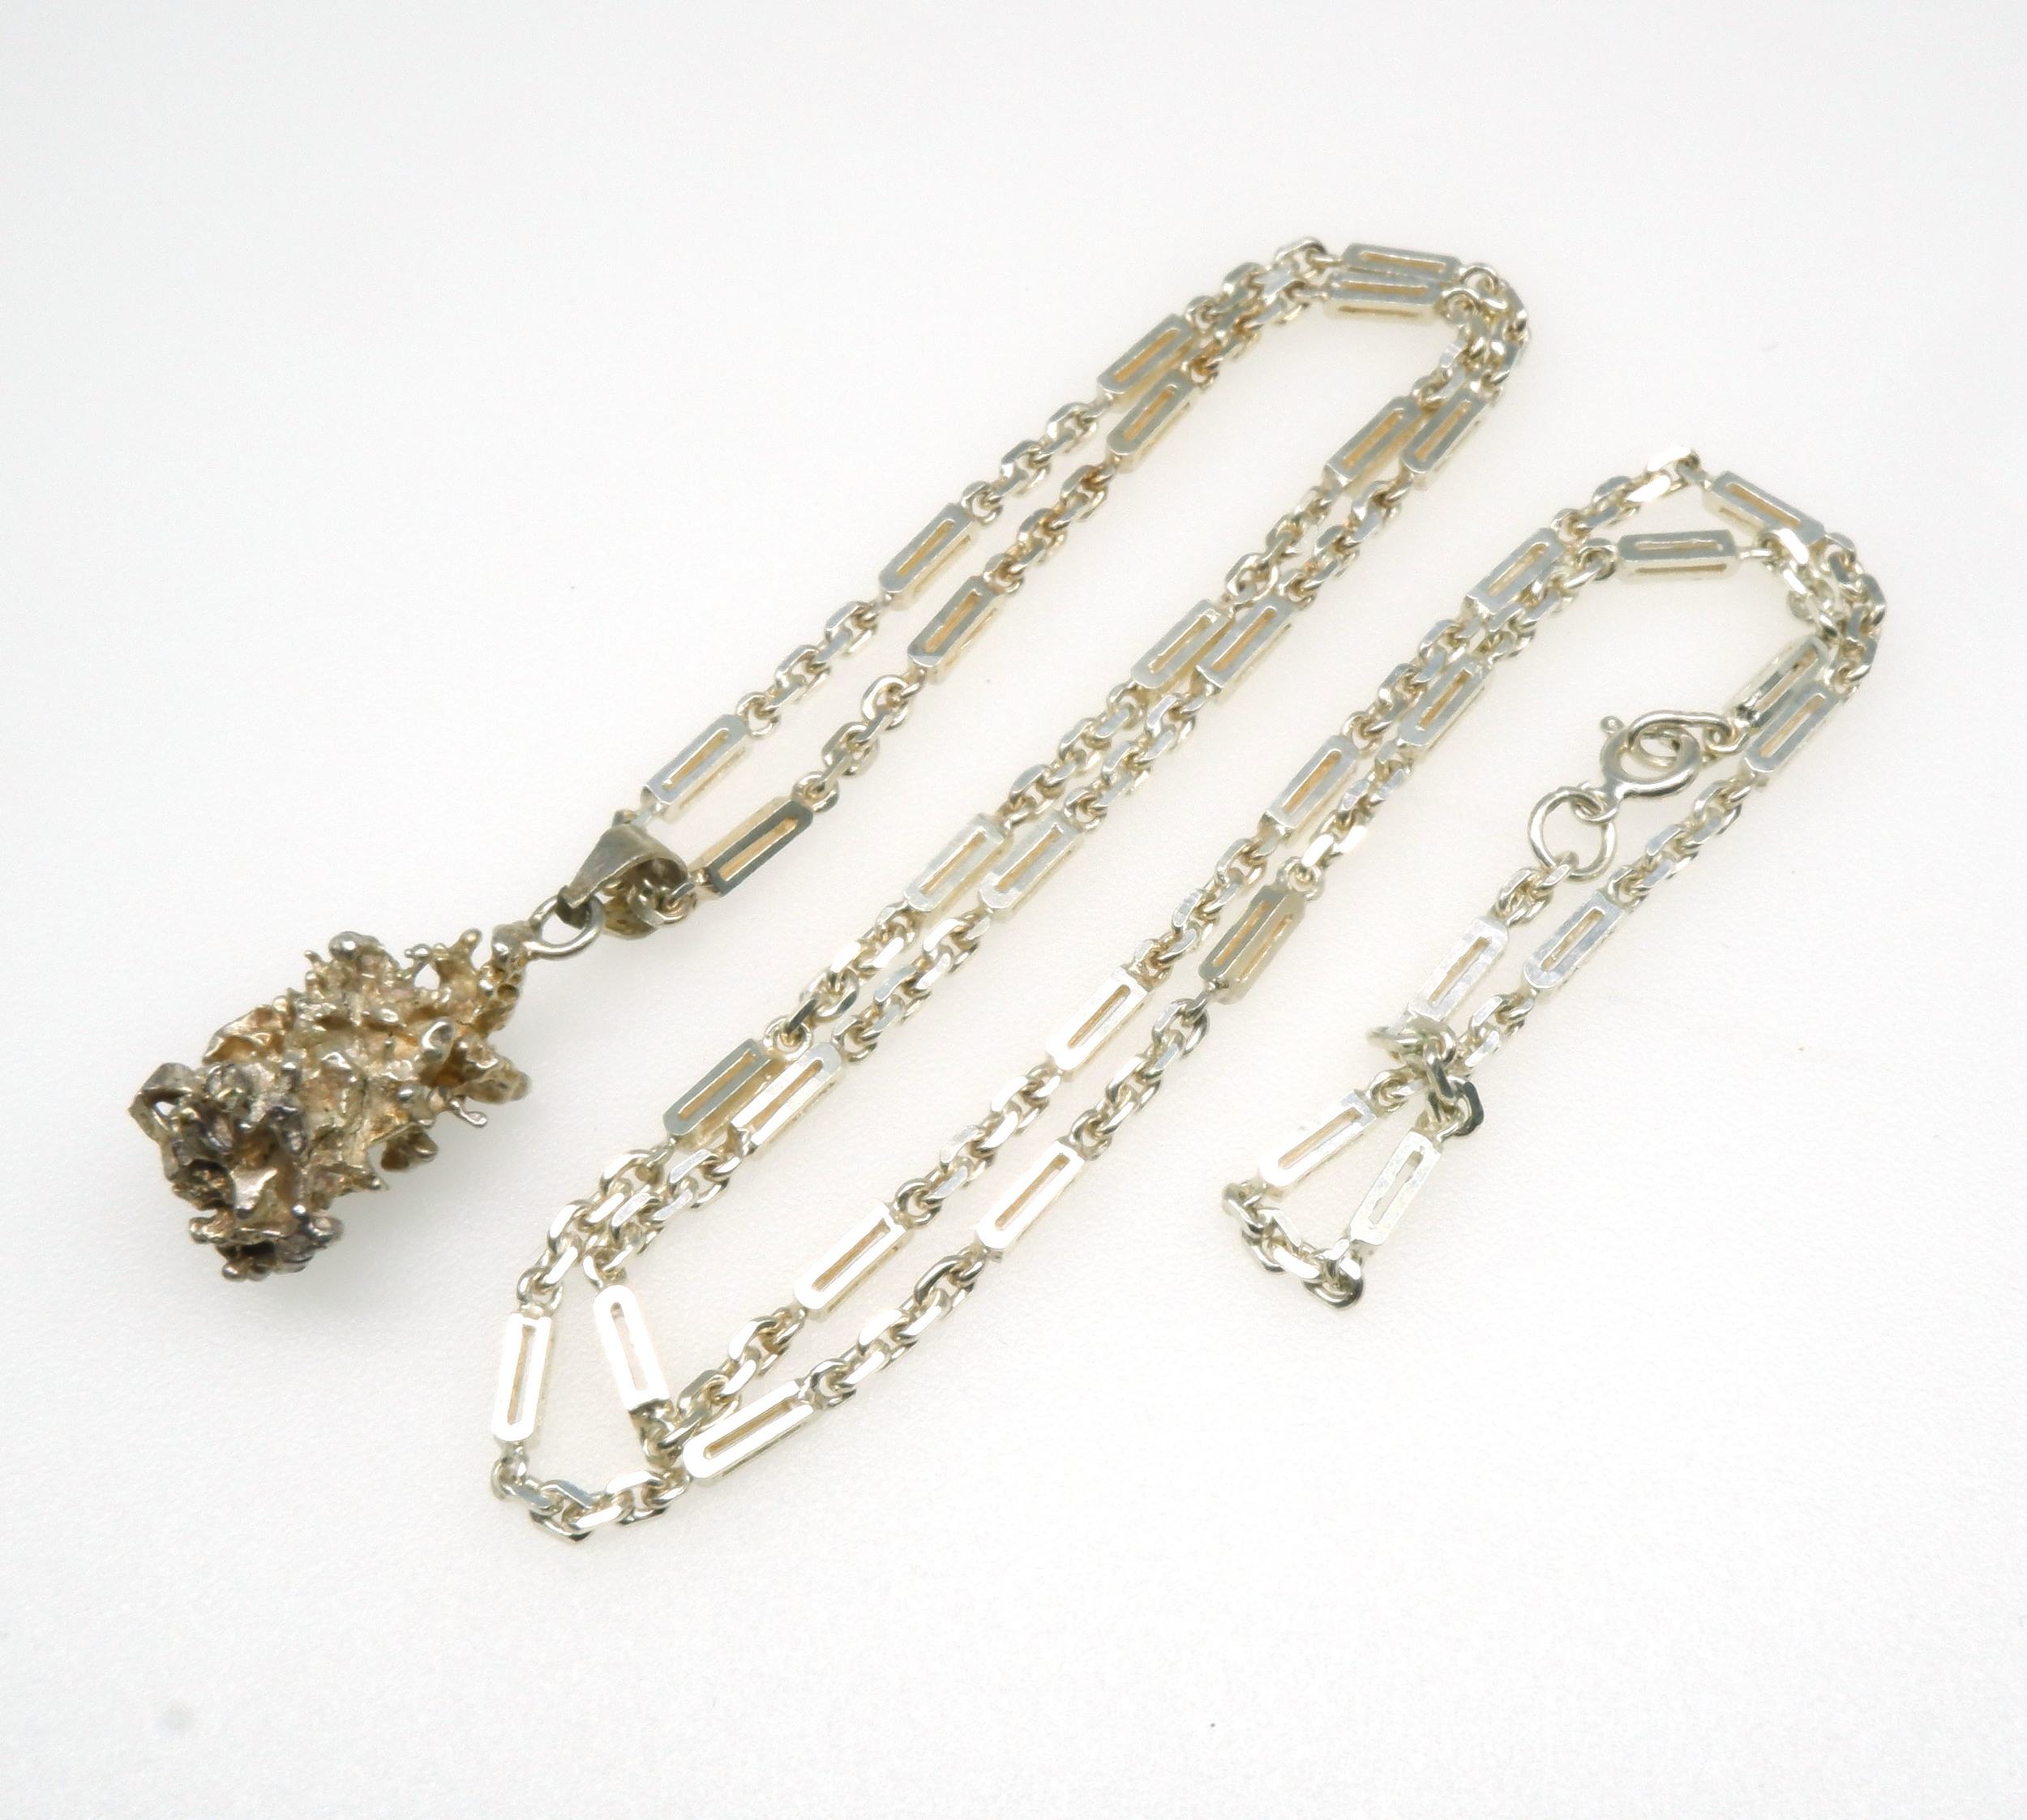 'Long Silver Matchstick Type Chain with a Silver Freeform Nugget Pendant'